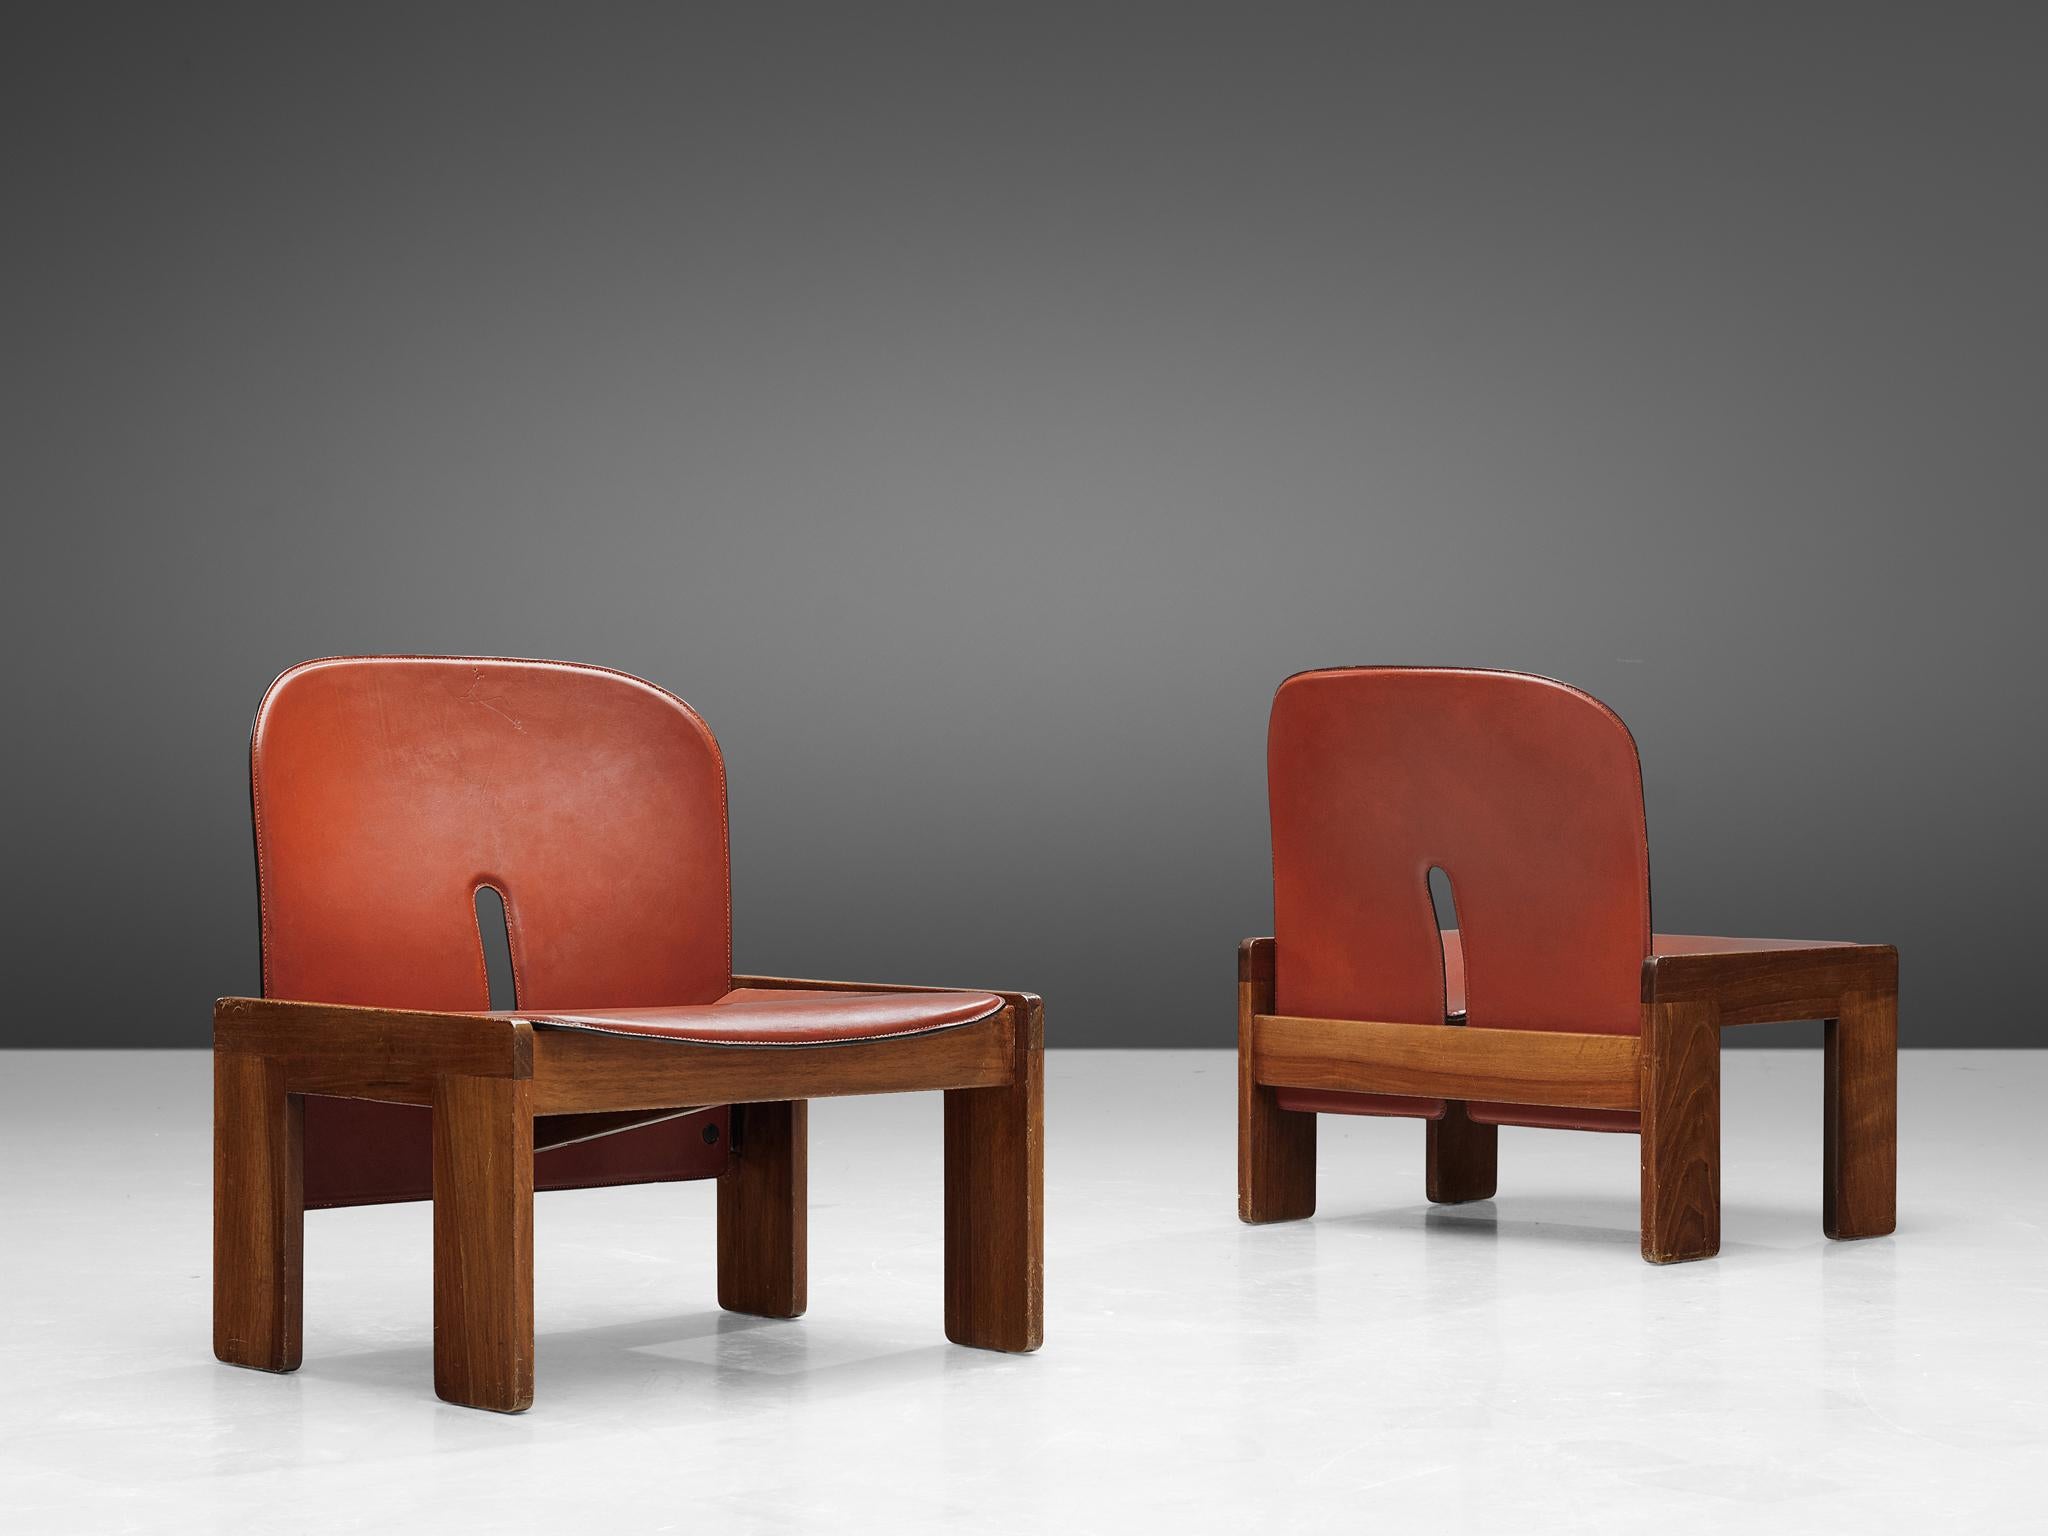 Afra & Tobia Scarpa for Cassina, pair of '925' easy chairs, walnut and leather, Italy, 1966

Set of two '925' lounge chairs by Italian designer couple Tobia and Afra Scarpa. These low chairs have a cubic and architectural appearance. The base